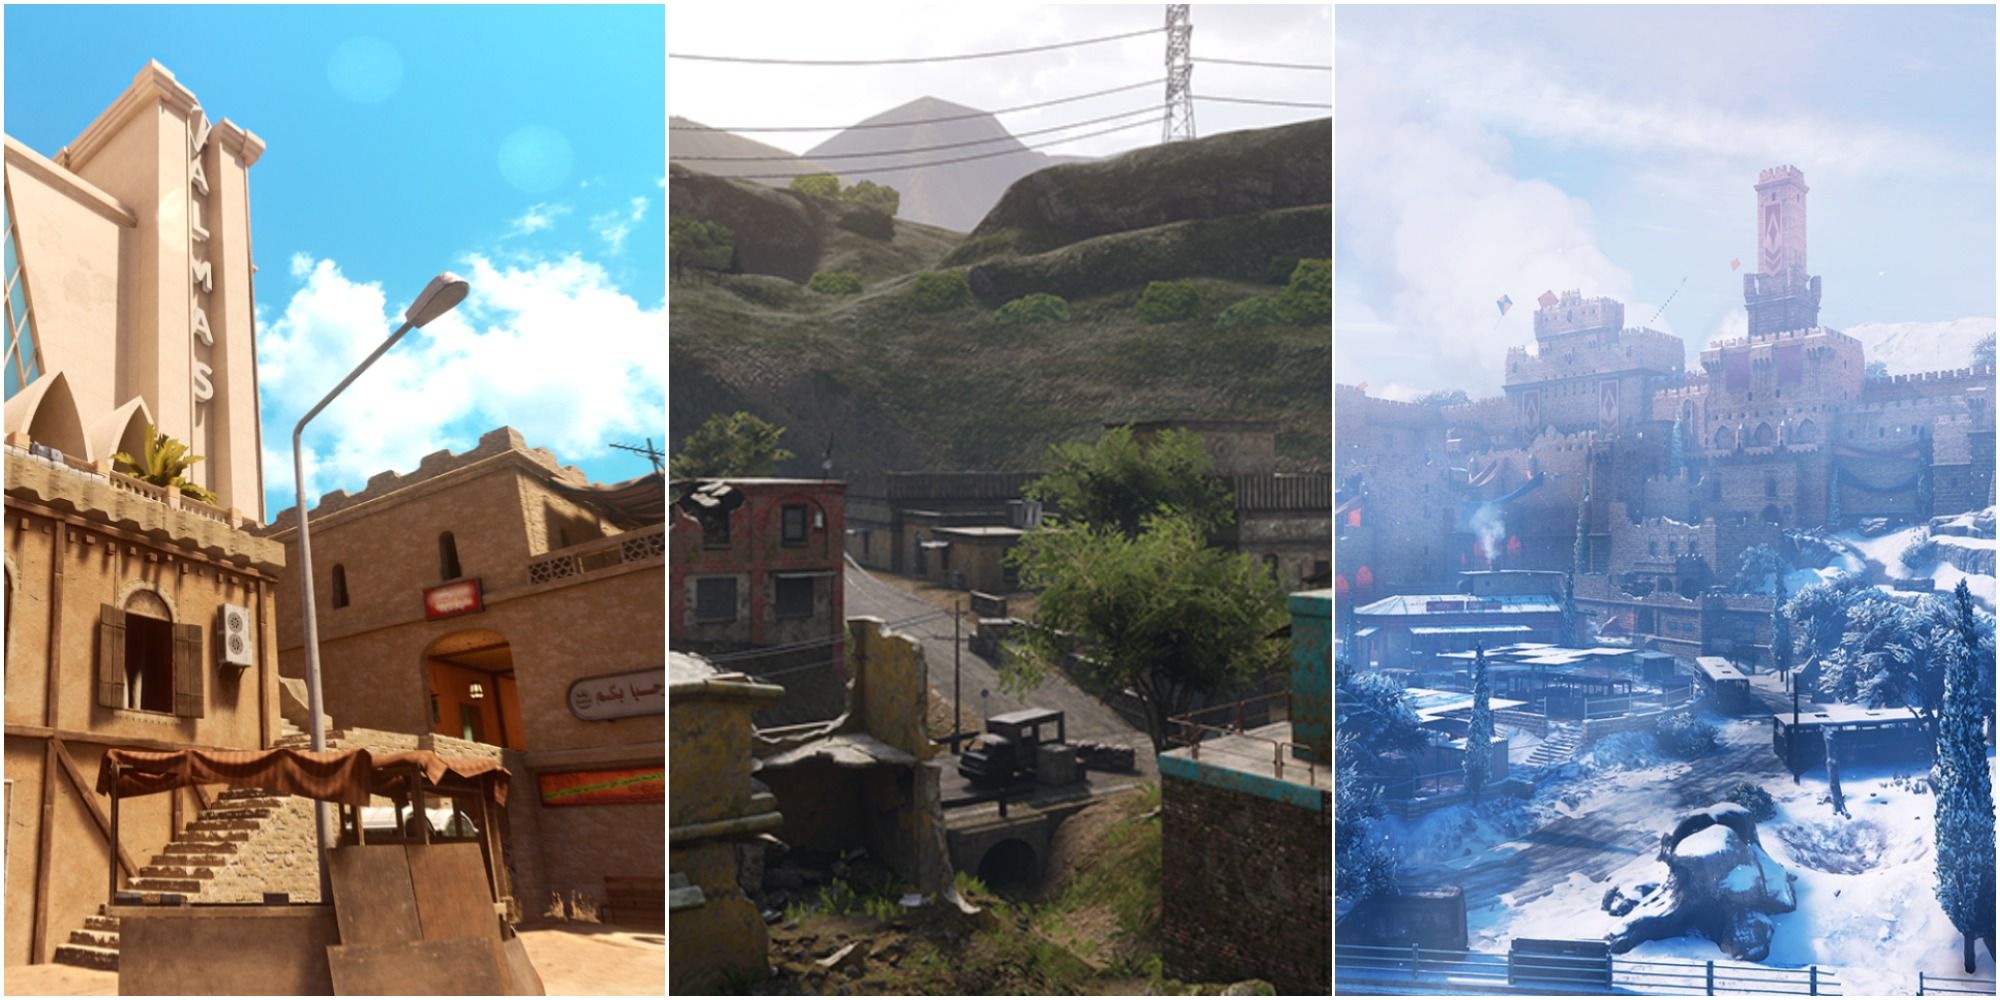 Insurgency Sandstorm Maps the map Gap on the left, Power Plant in the middle and Bab on the right